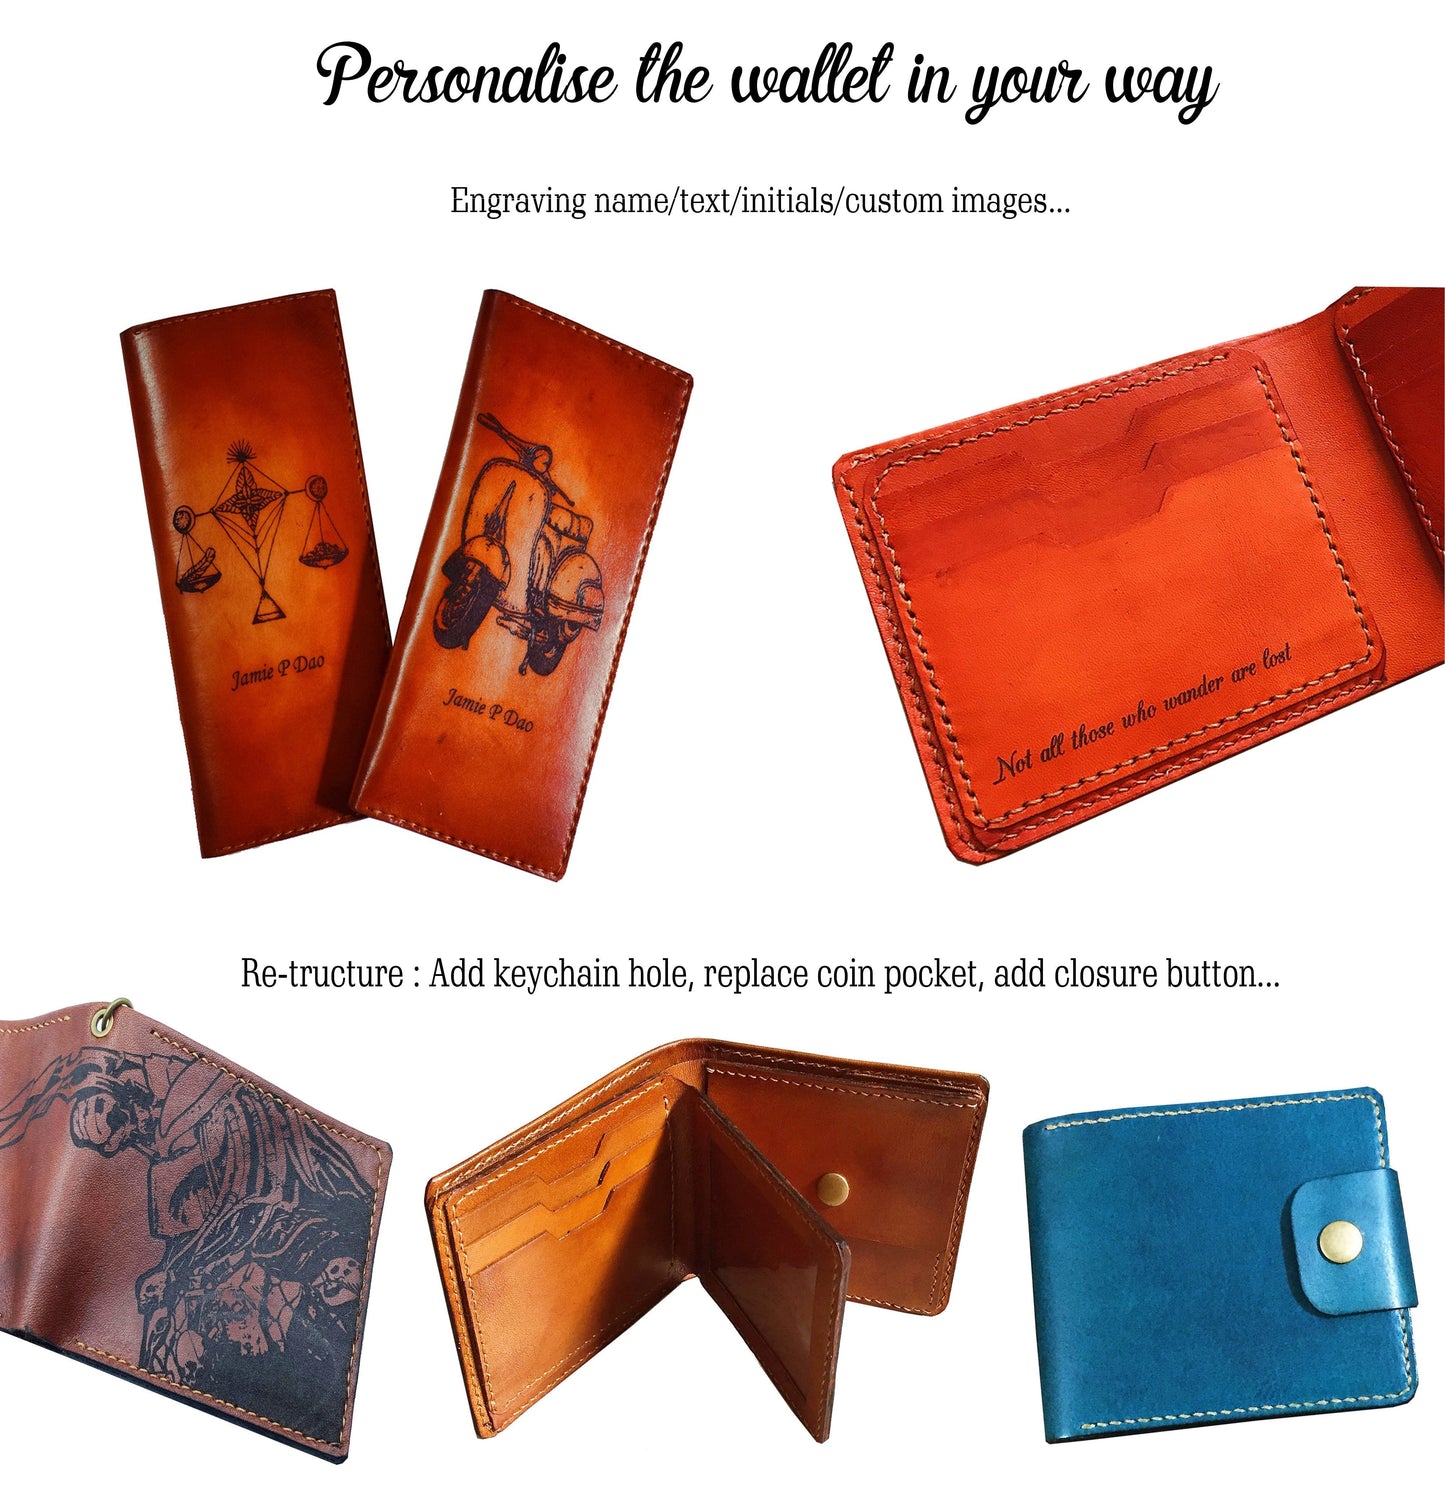 Mayan Corner - Customized leather handmade wallet, Harry Potter leather wallet, wizard leather art present